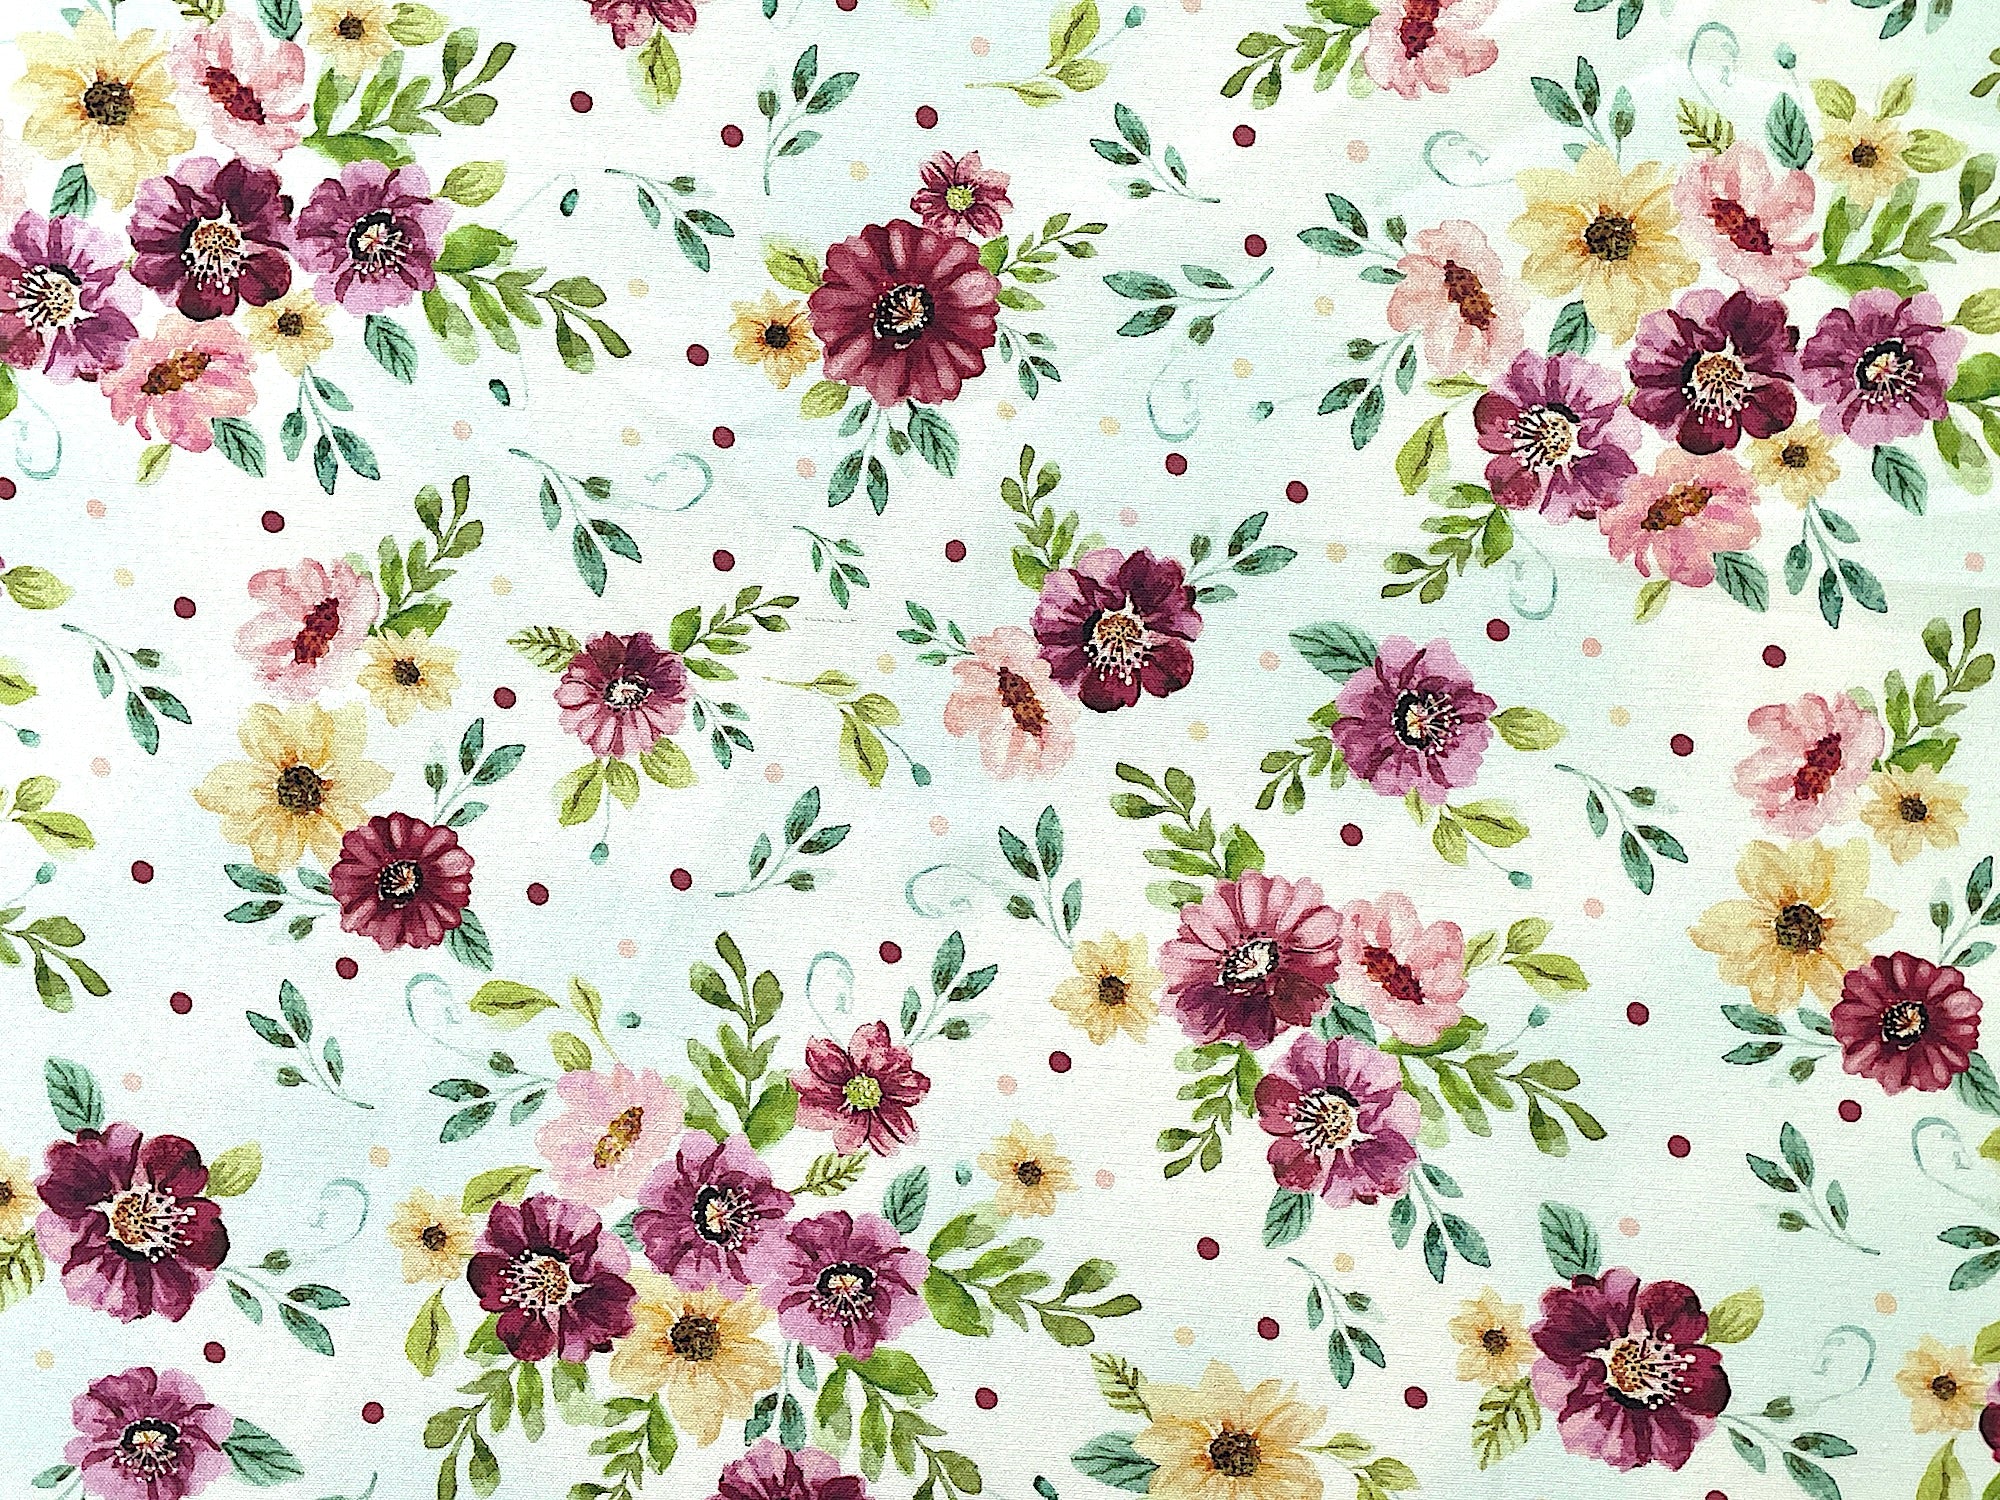 This fabric is part of the Sew in Love Collection by Rockstar Sewing.  This white cotton fabric is covered with pink, red and yellow flowers and green leaves